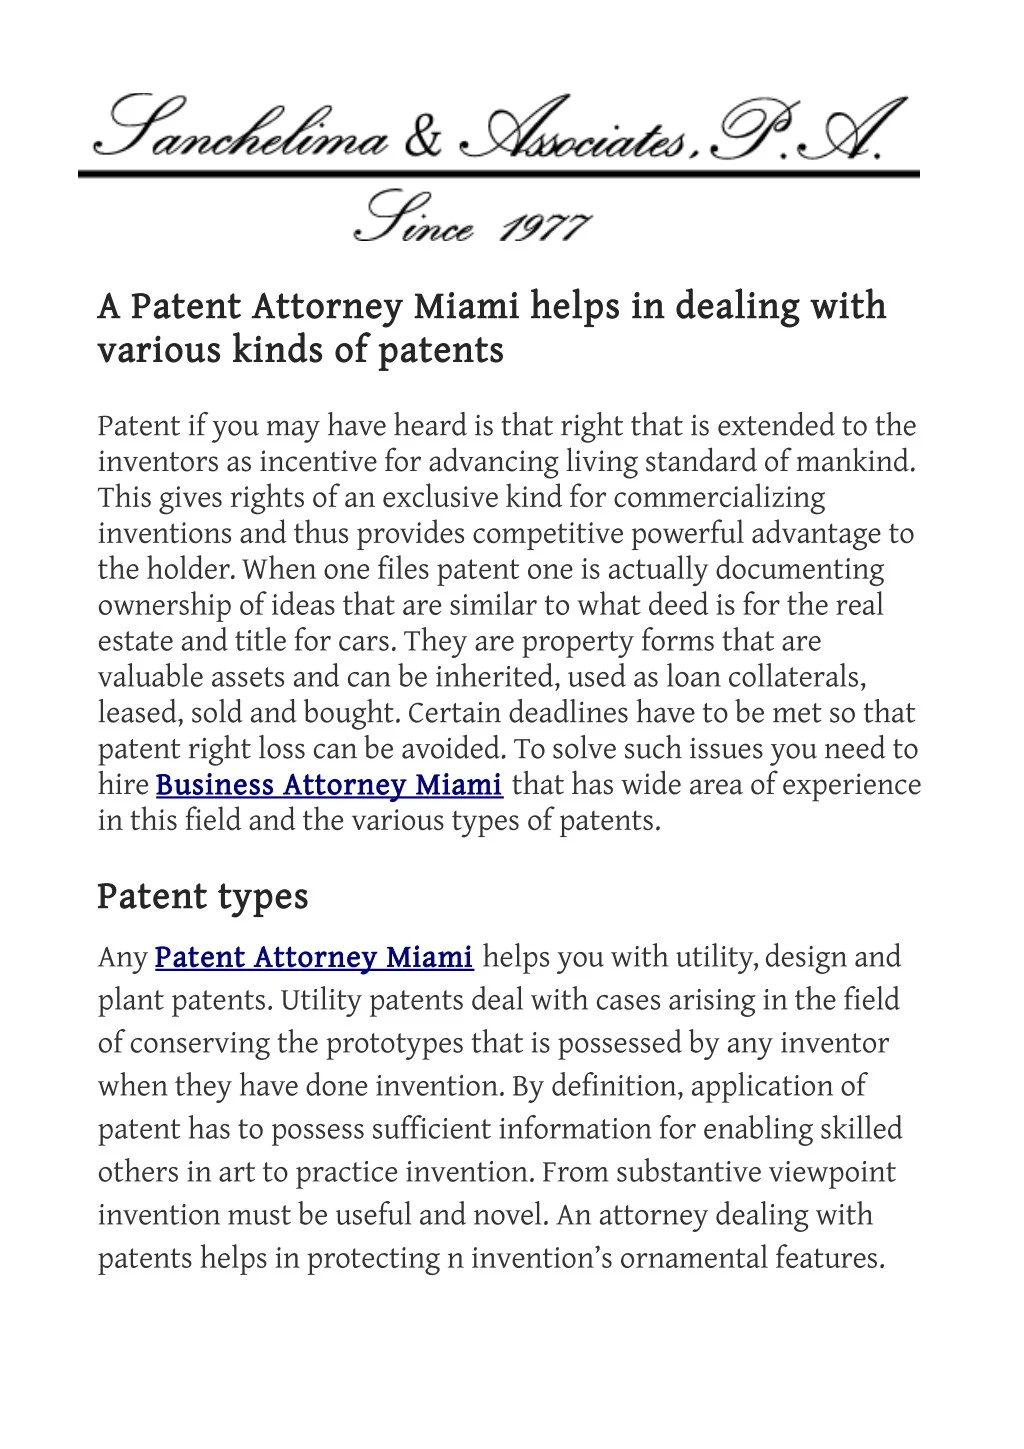 a patent attorney miami helps in dealing with